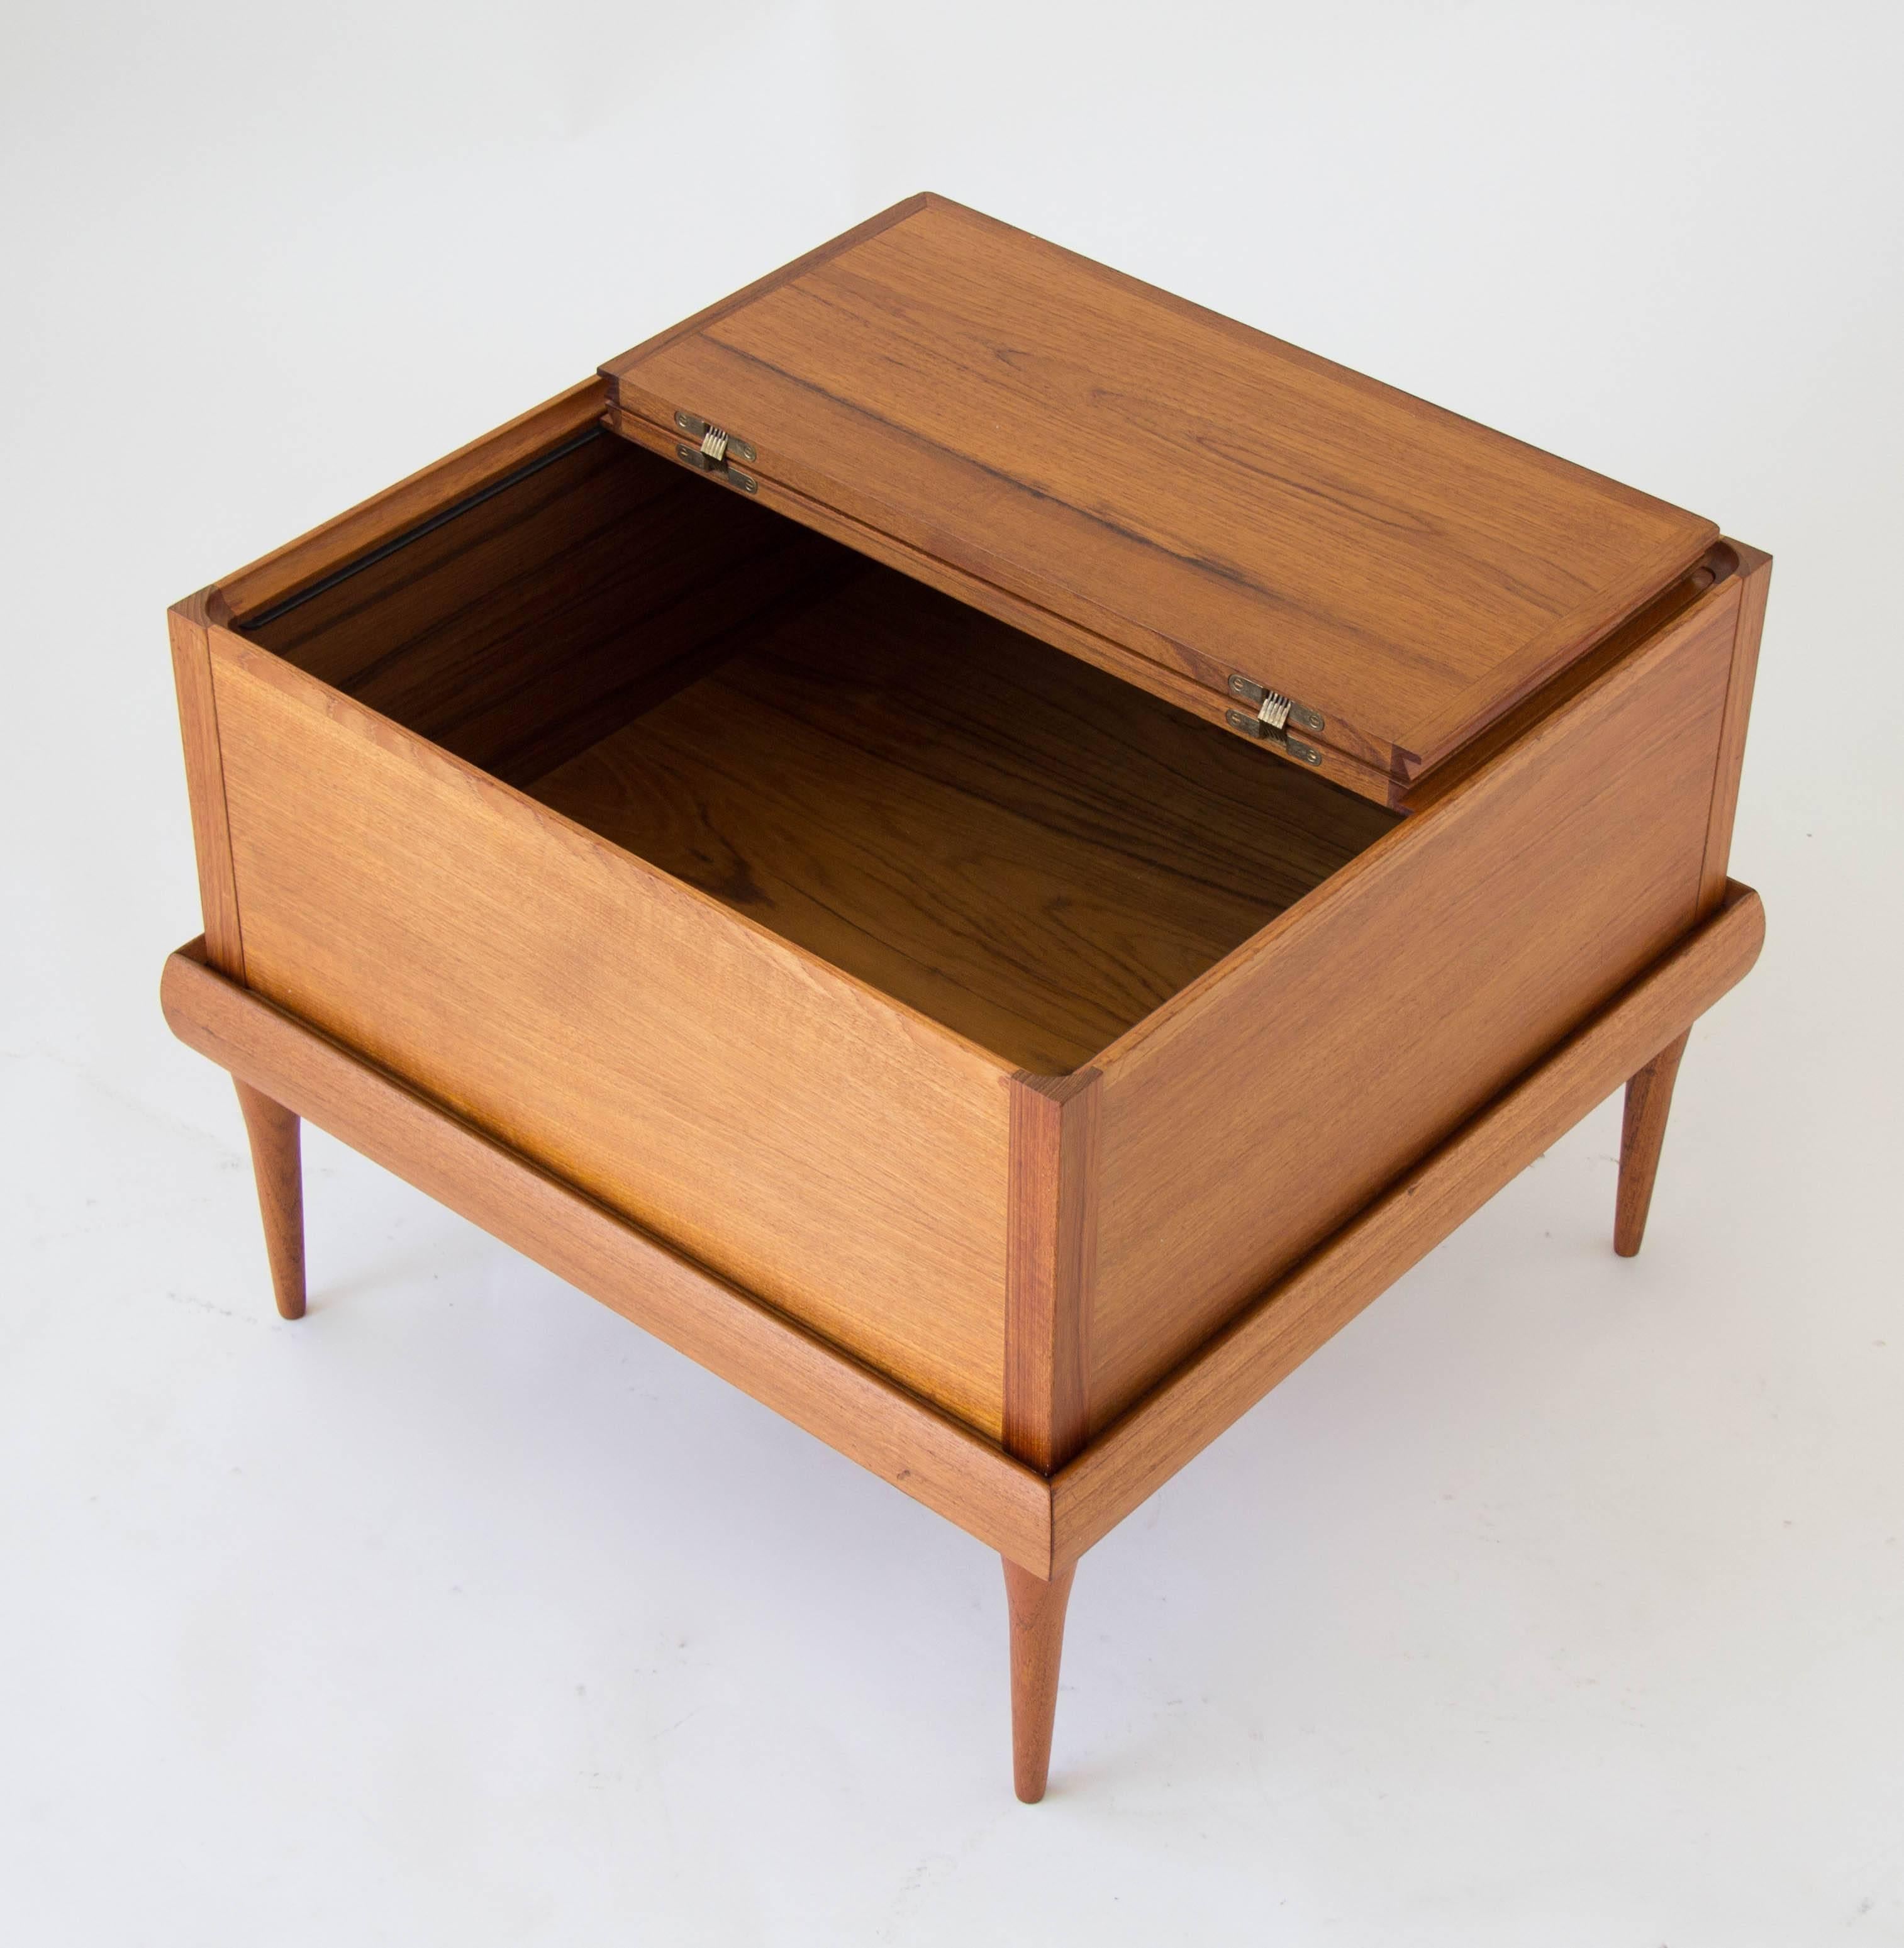 Teak storage cube from H. W. Klein’s modular seating group for Bramin Møbler of Denmark. The free-floating box sits in a matching teak square table with tapered legs. The lid has a center hinge, opening on both sides to facilitate access to the